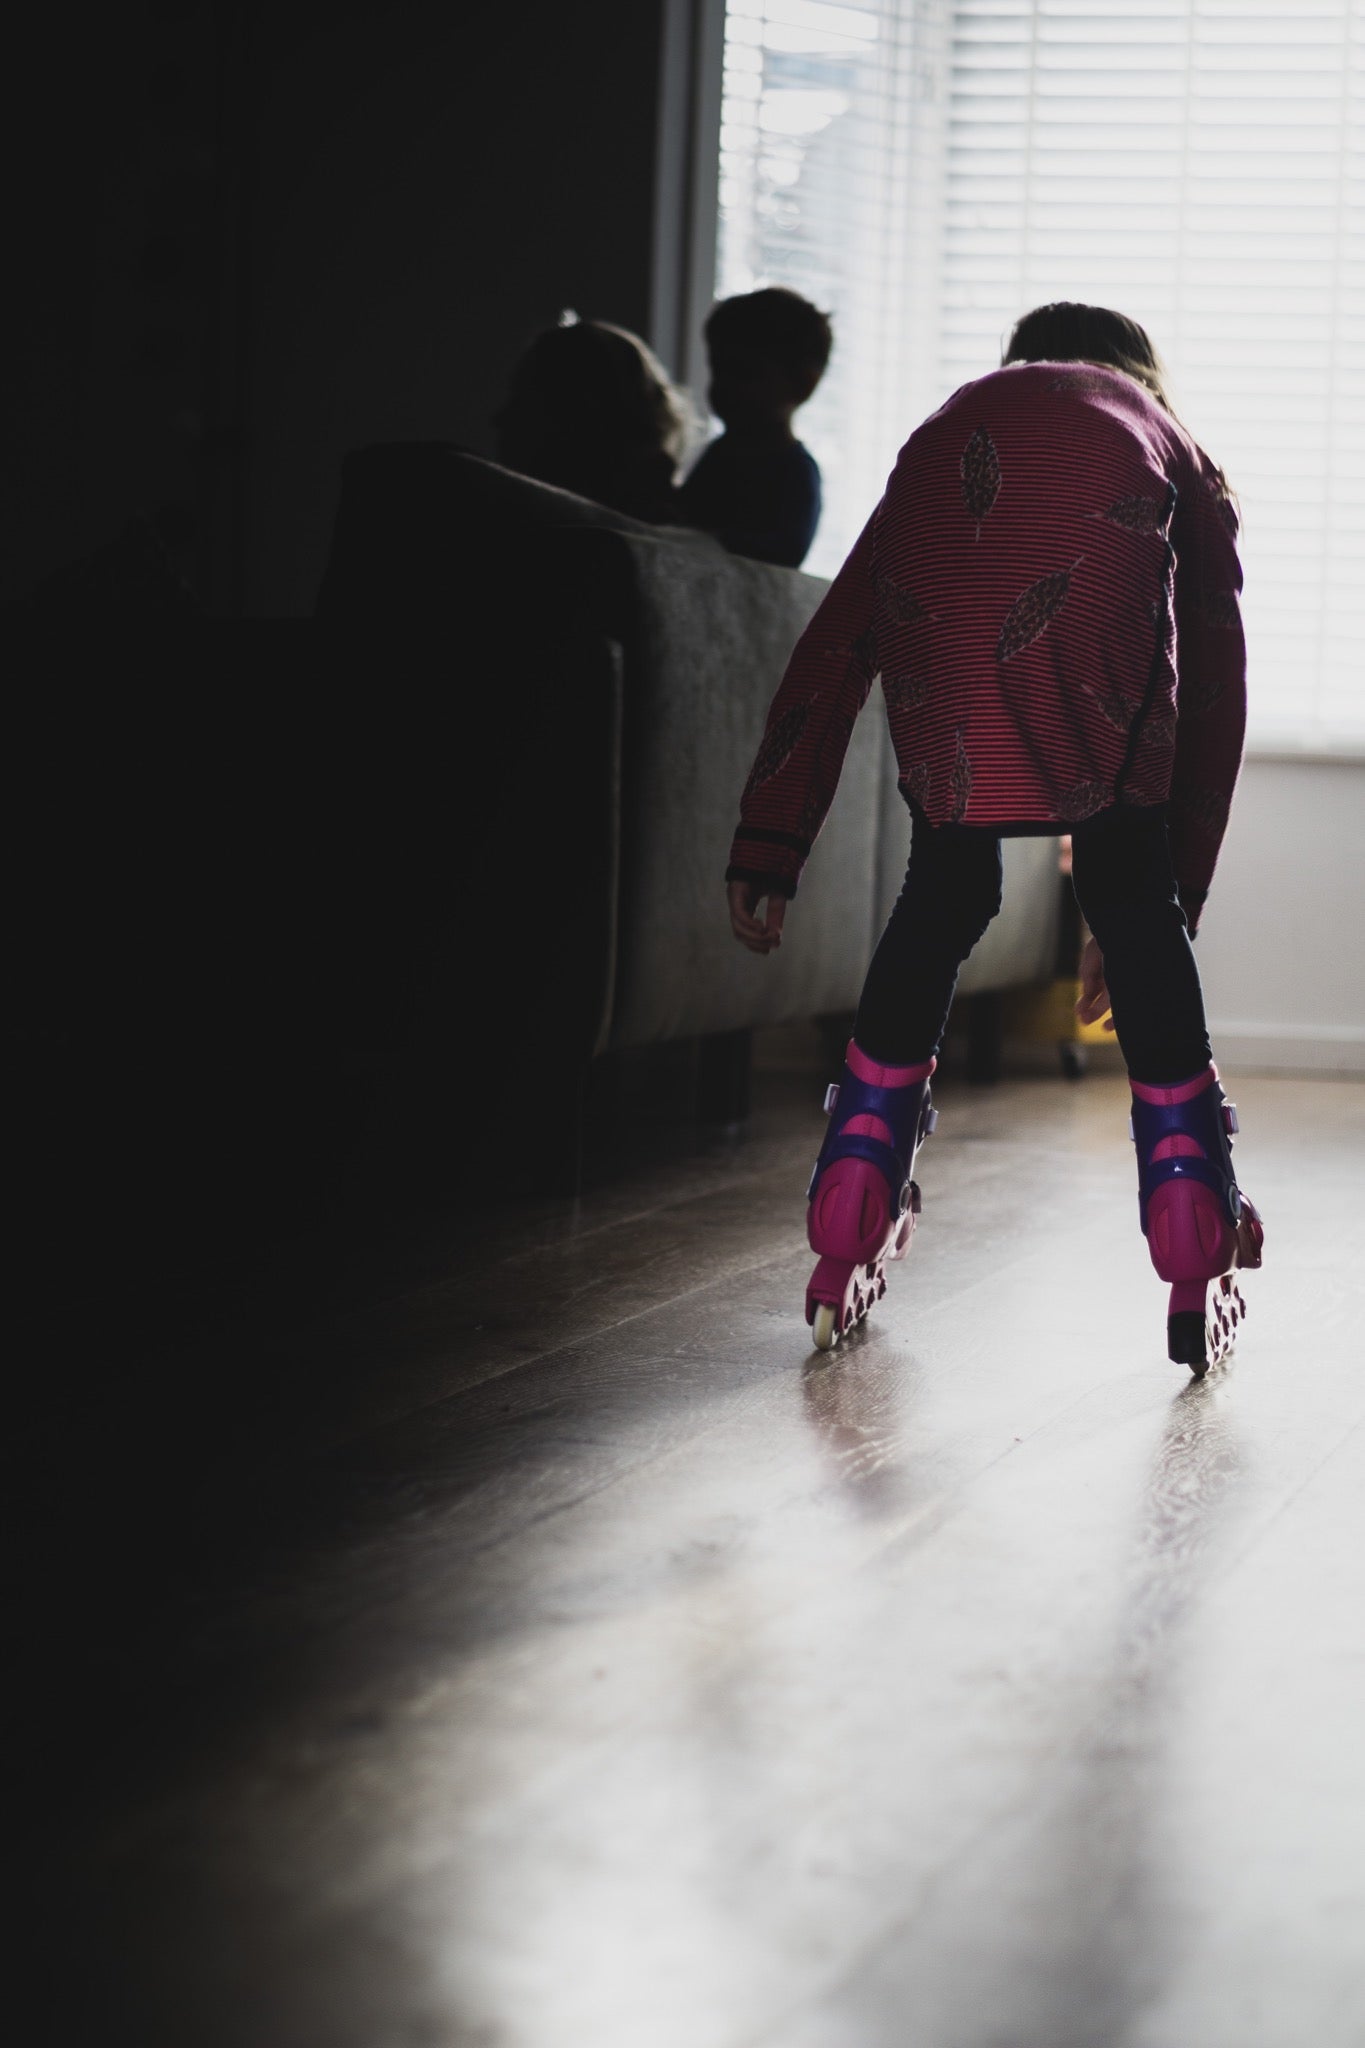 Young girl rollerblading inside